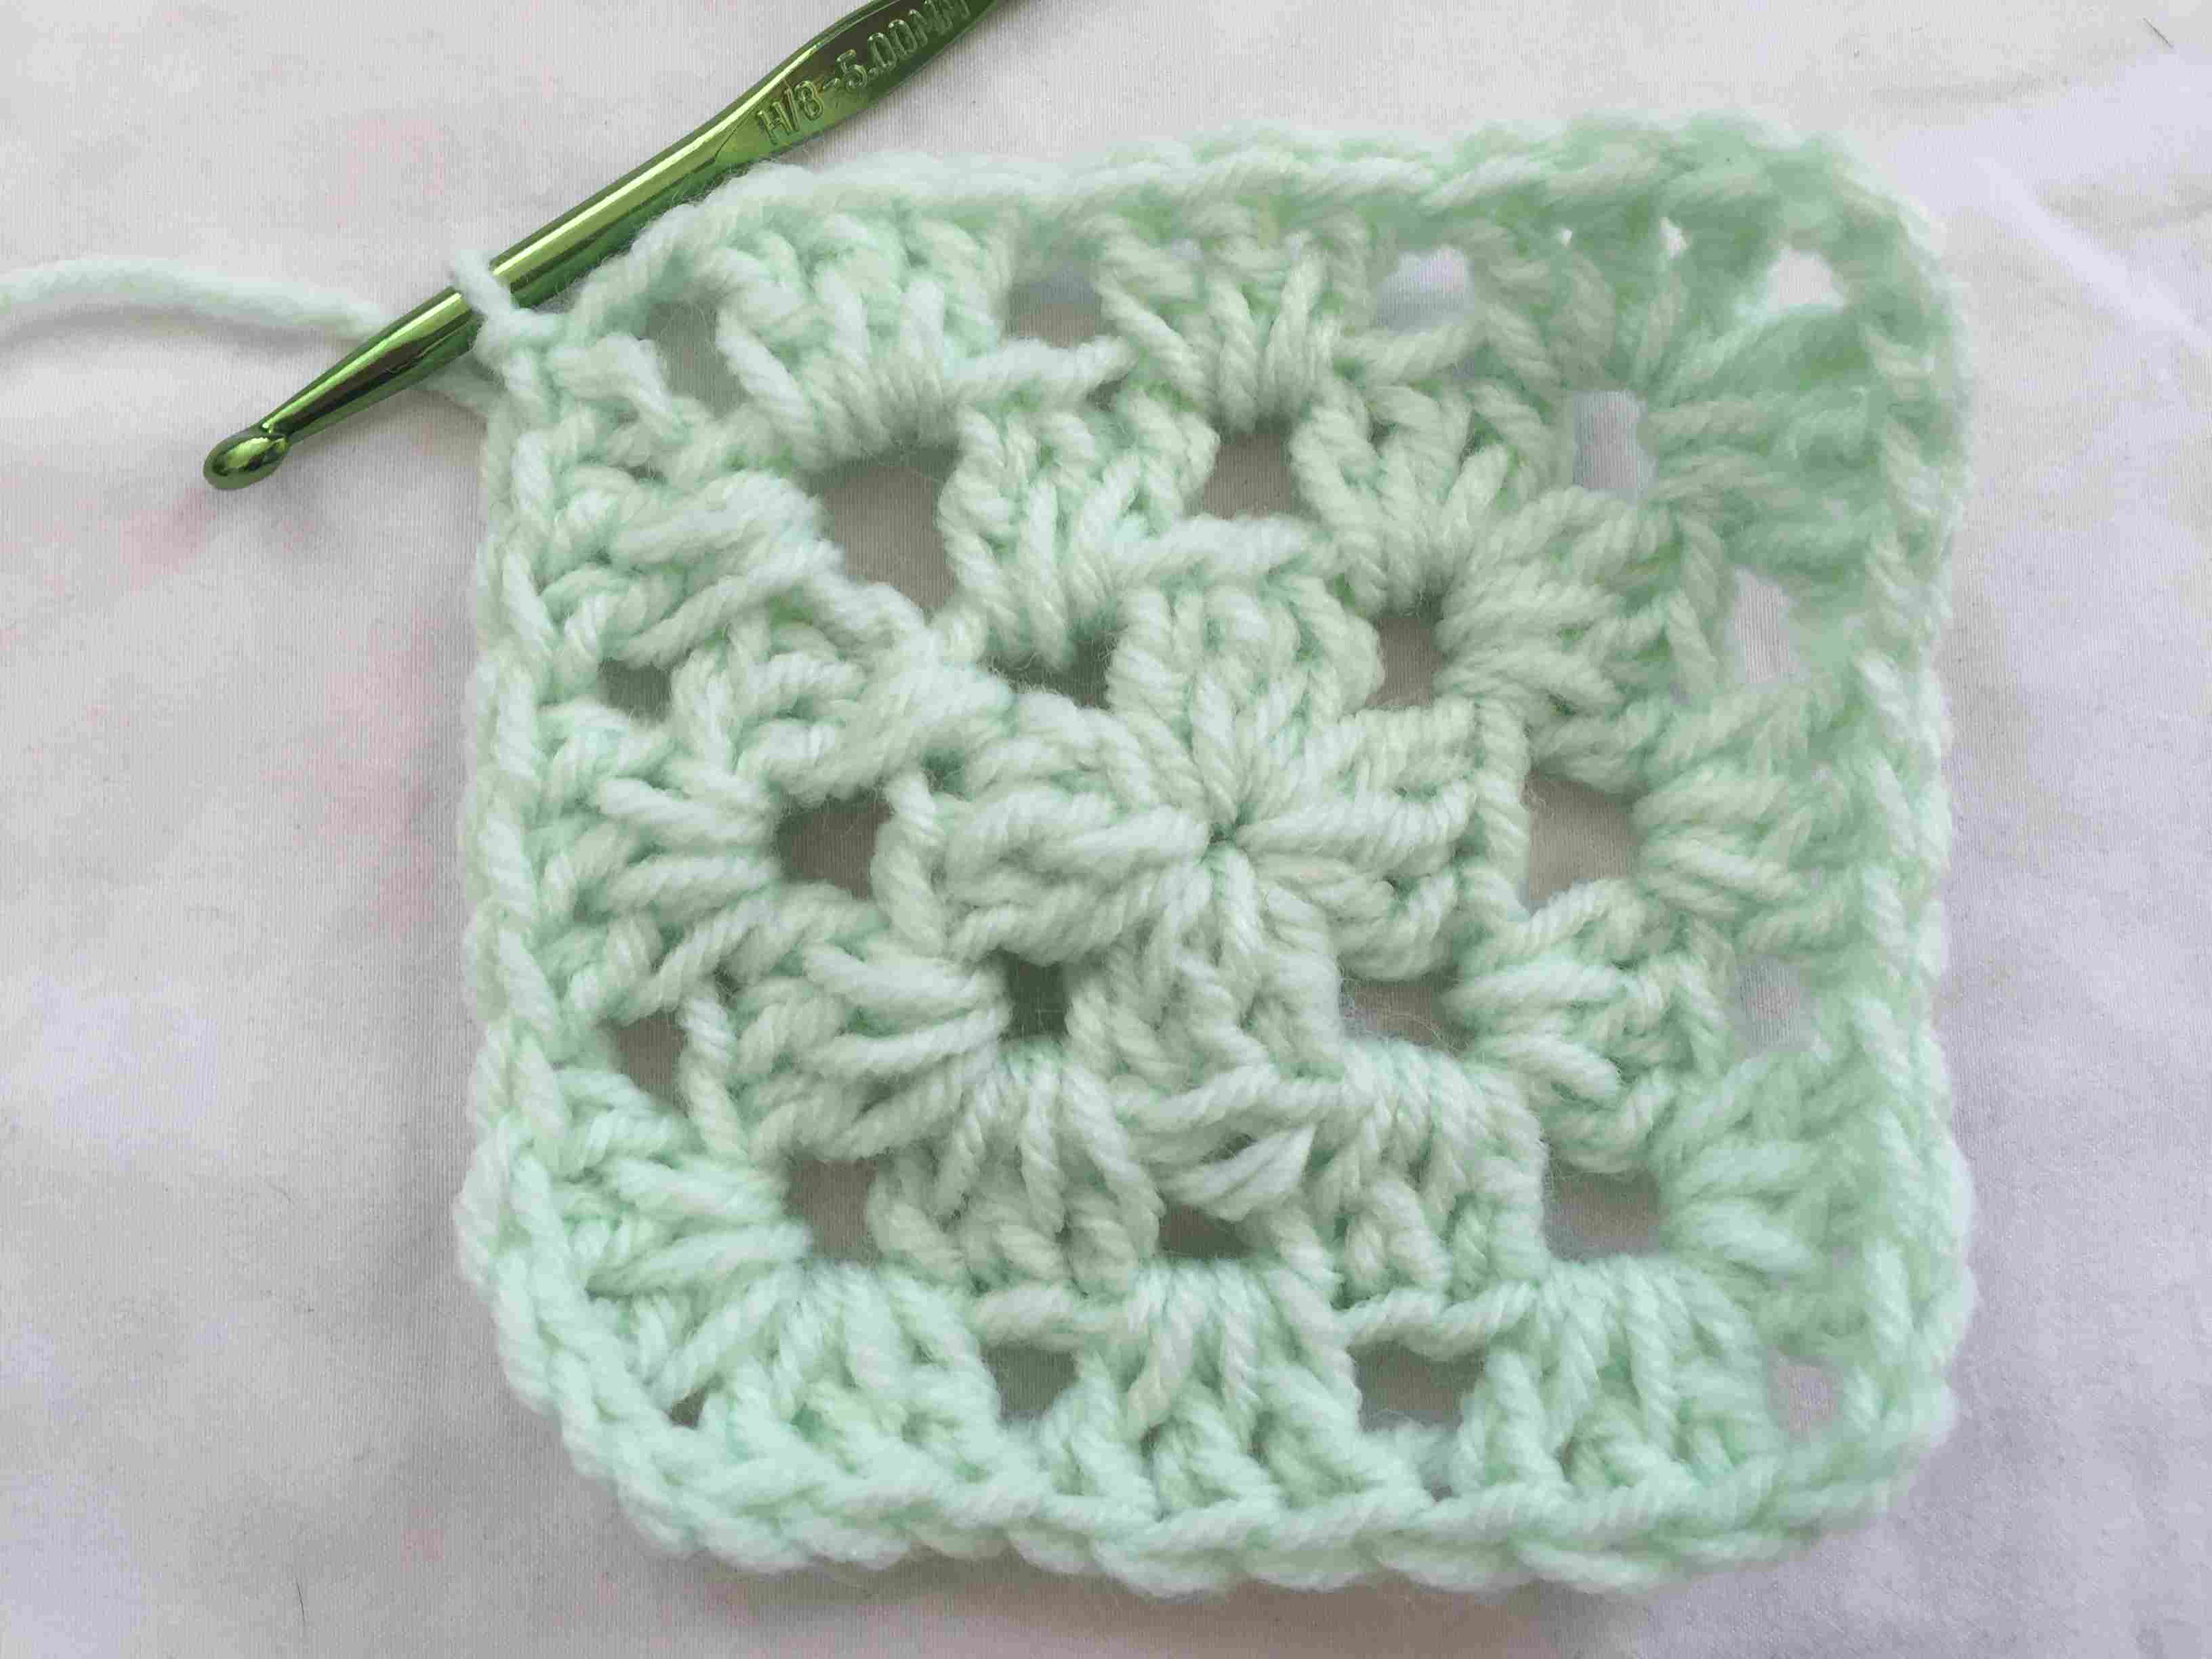 Begginer Crochet Projects Easy Patterns Easy Free Crochet Patterns For Beginners